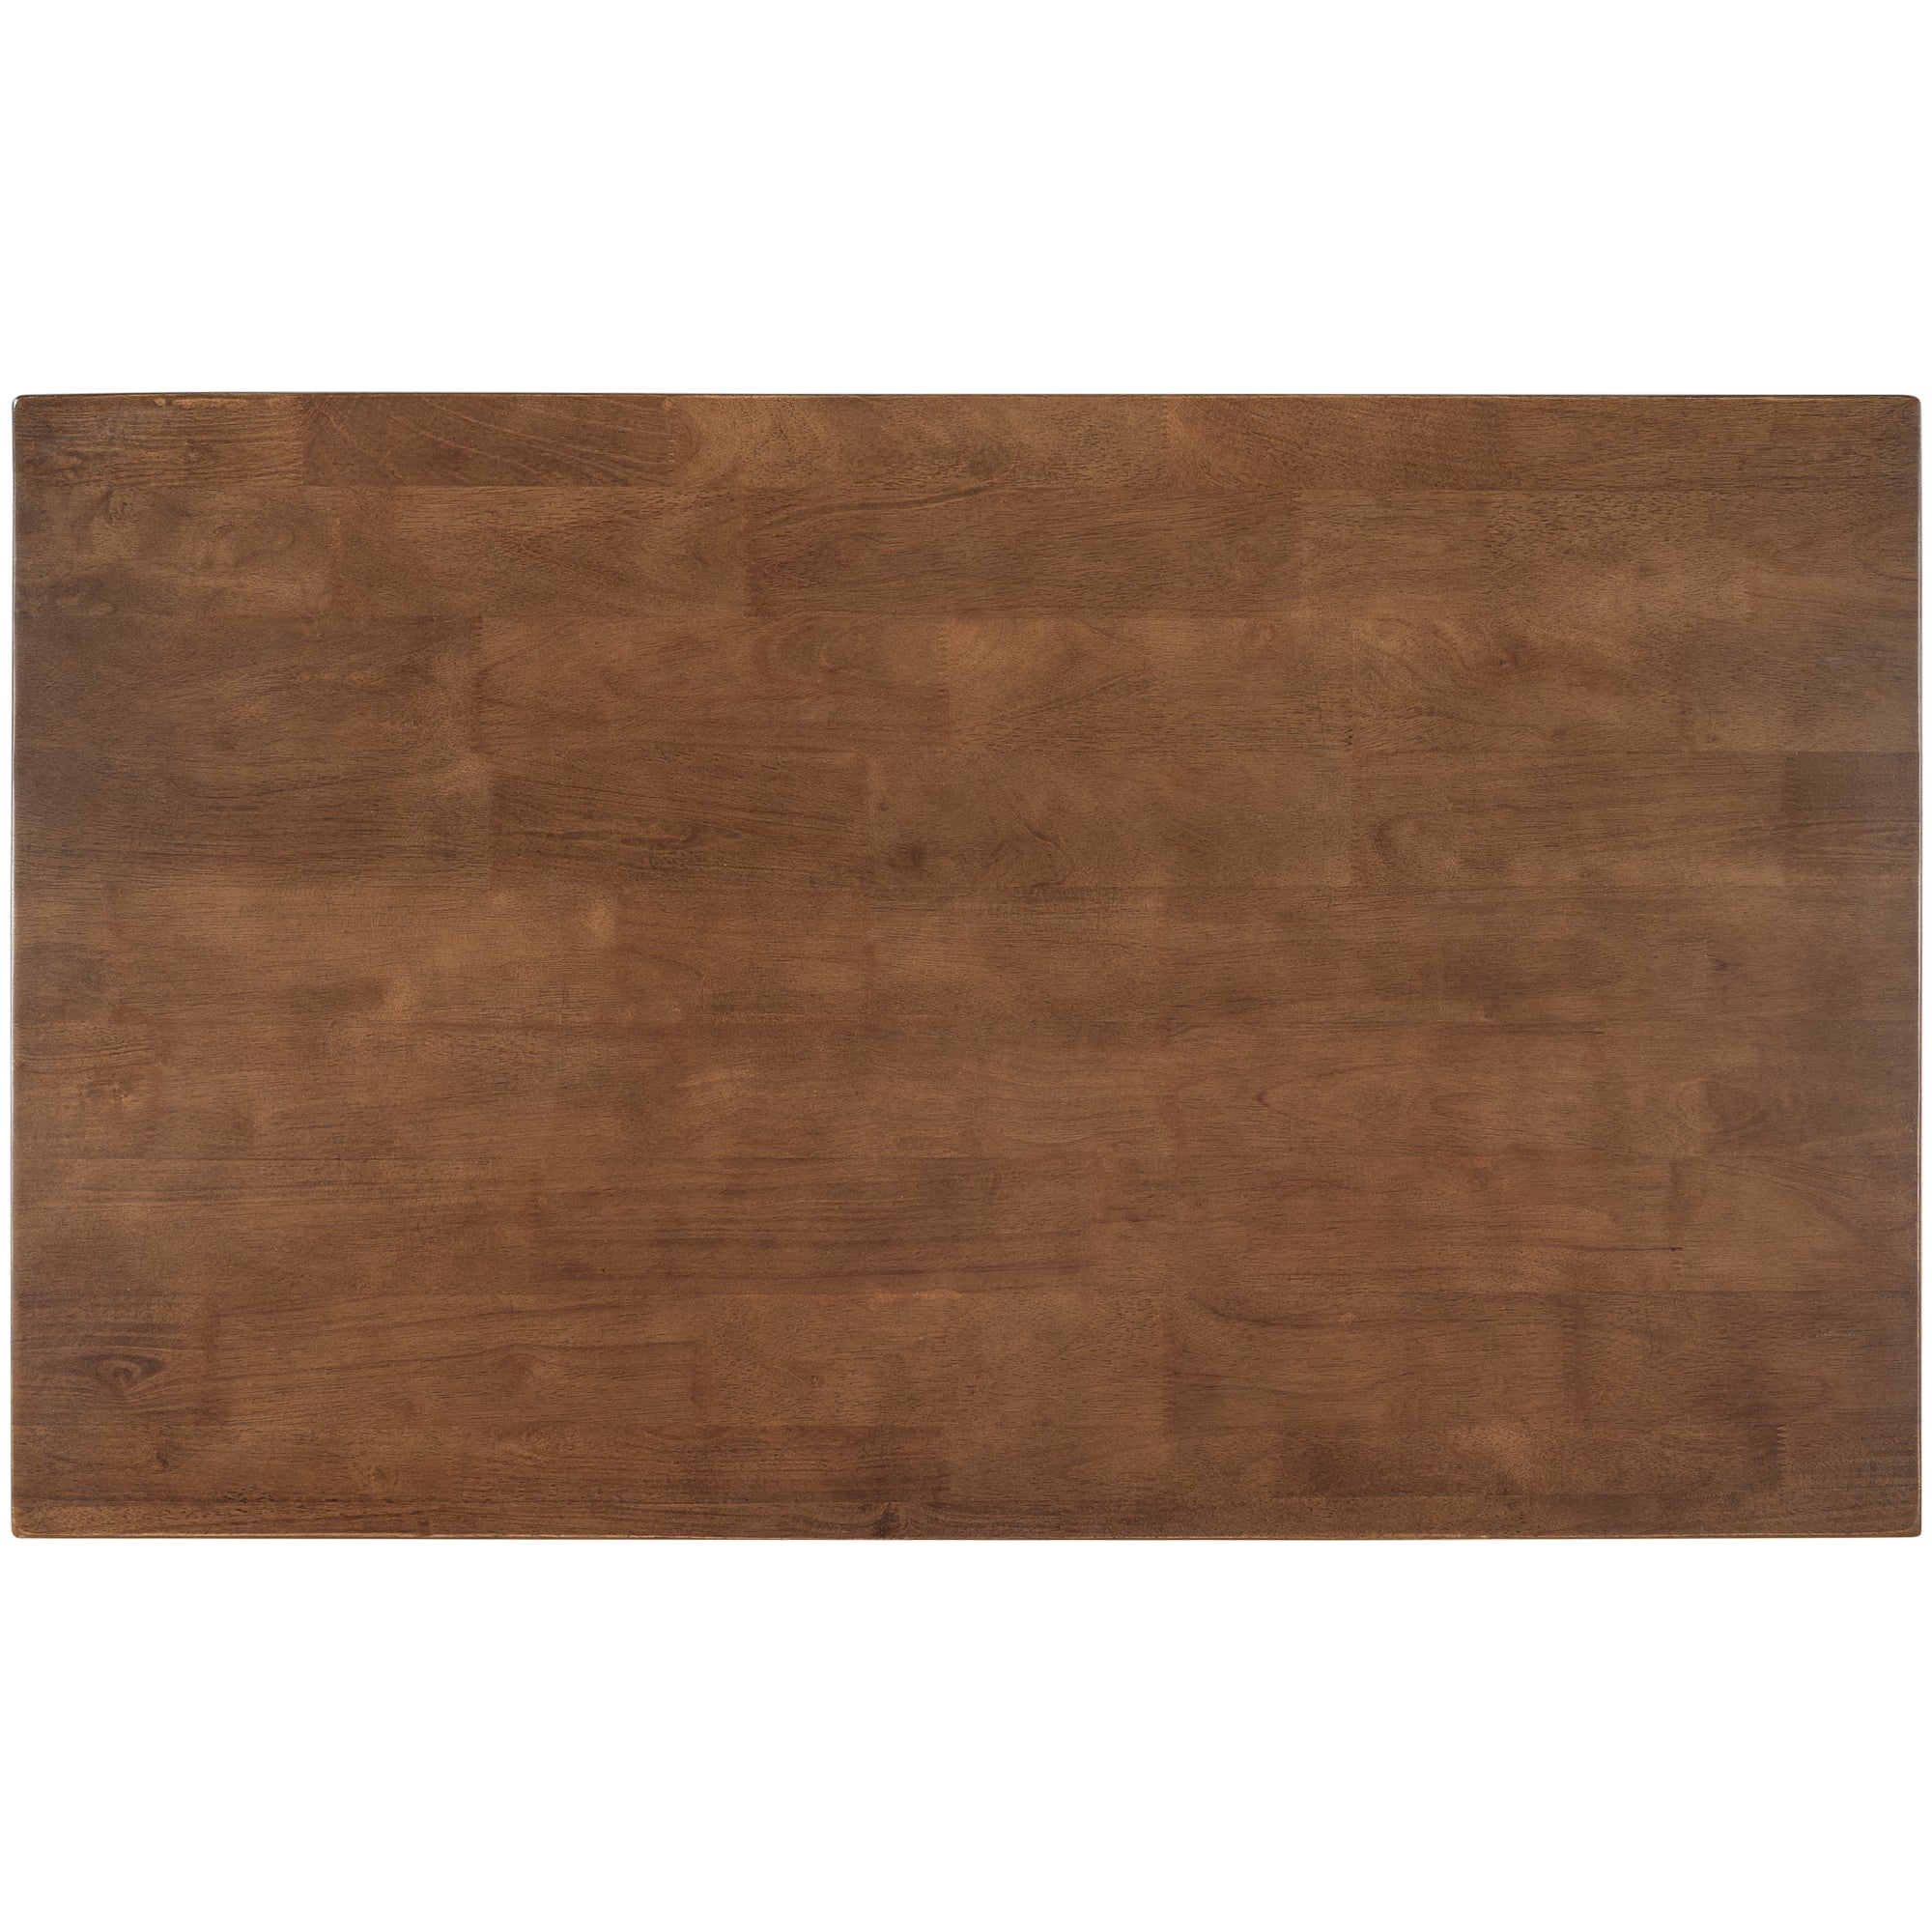 Solid Wood Rustic 45" Stationary Kitchen walnut-dining room-rustic-rectangular-kitchen